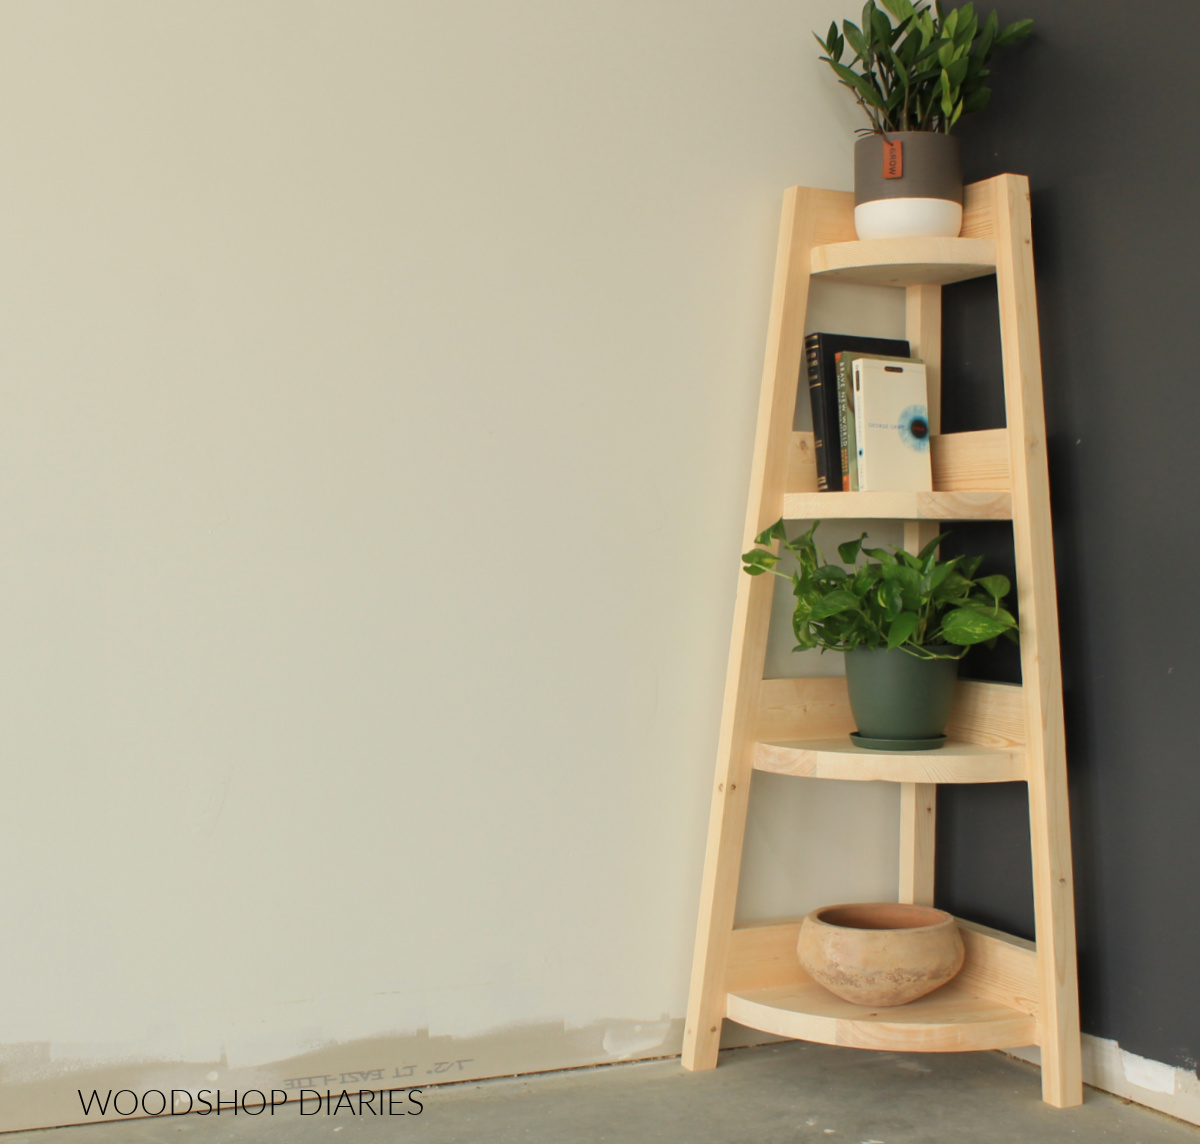 Wooden corner shelf in corner against a black and white wall with books and plants on shelves